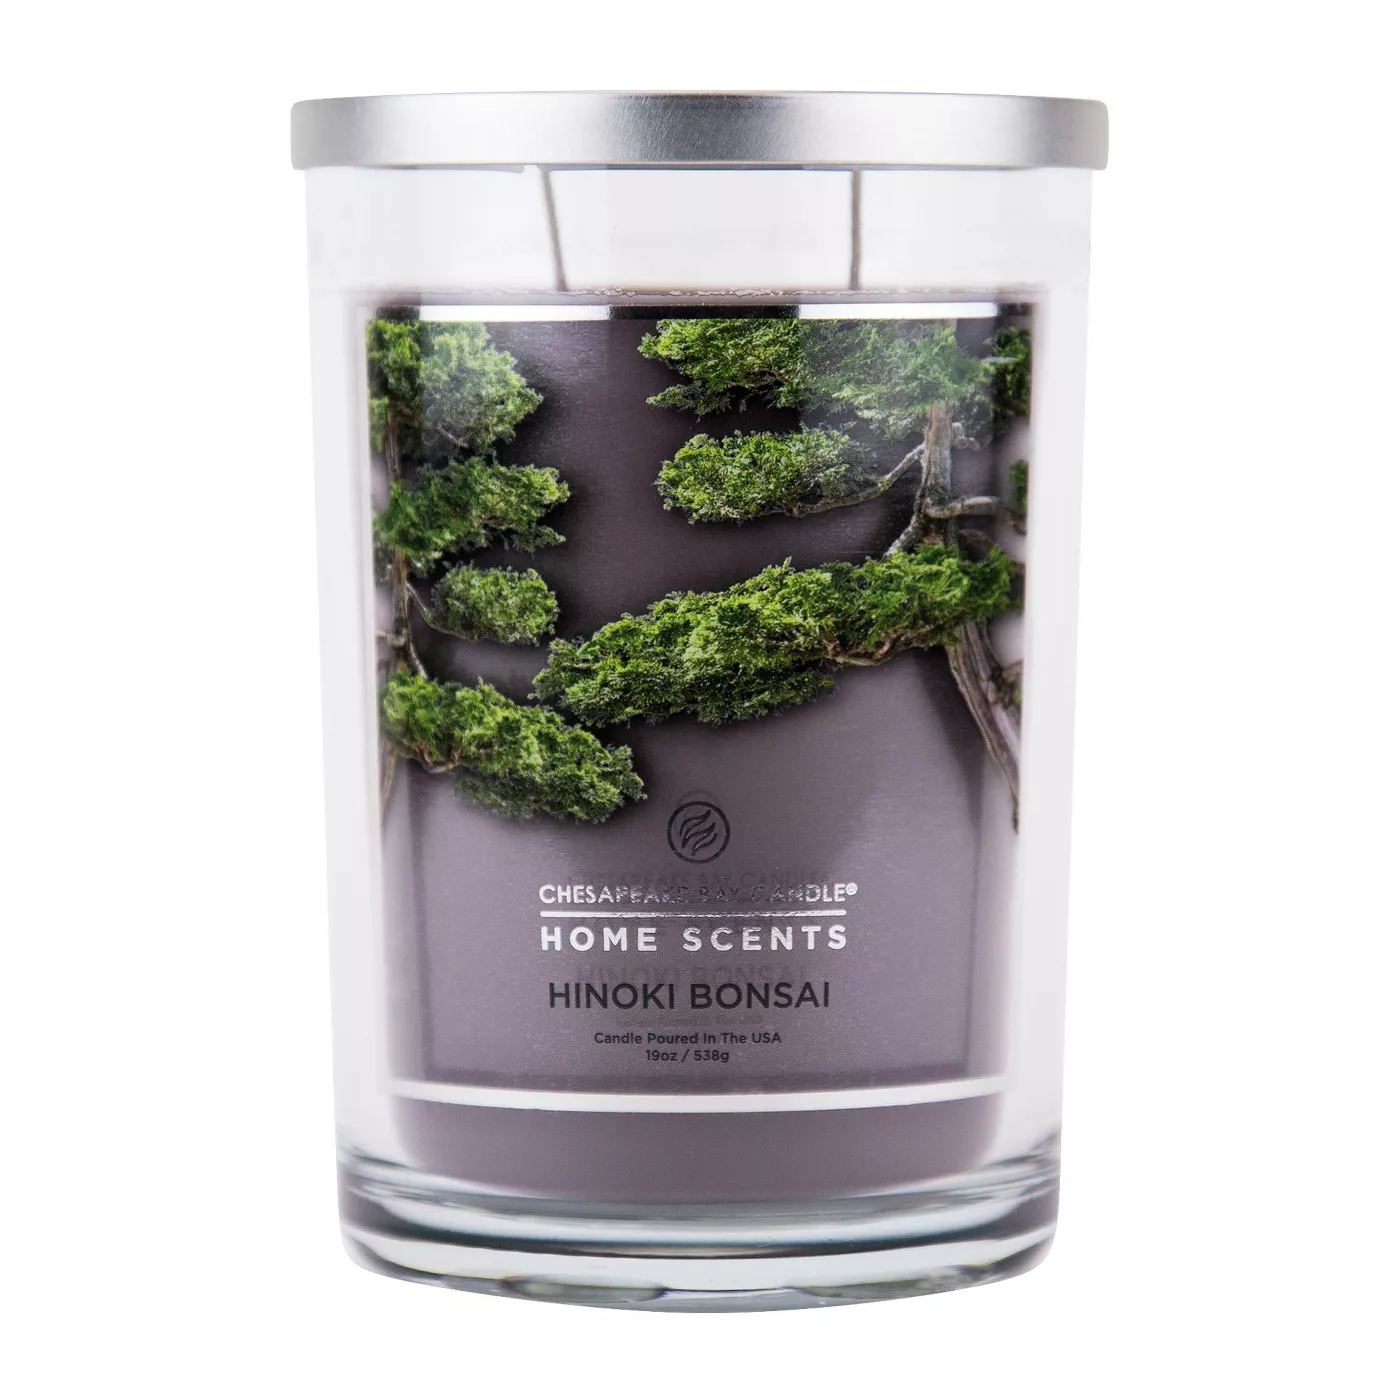 19oz Jar Candle Hinoki Bonsai - Home Scents By Chesapeake Bay Candle - image 1 of 1